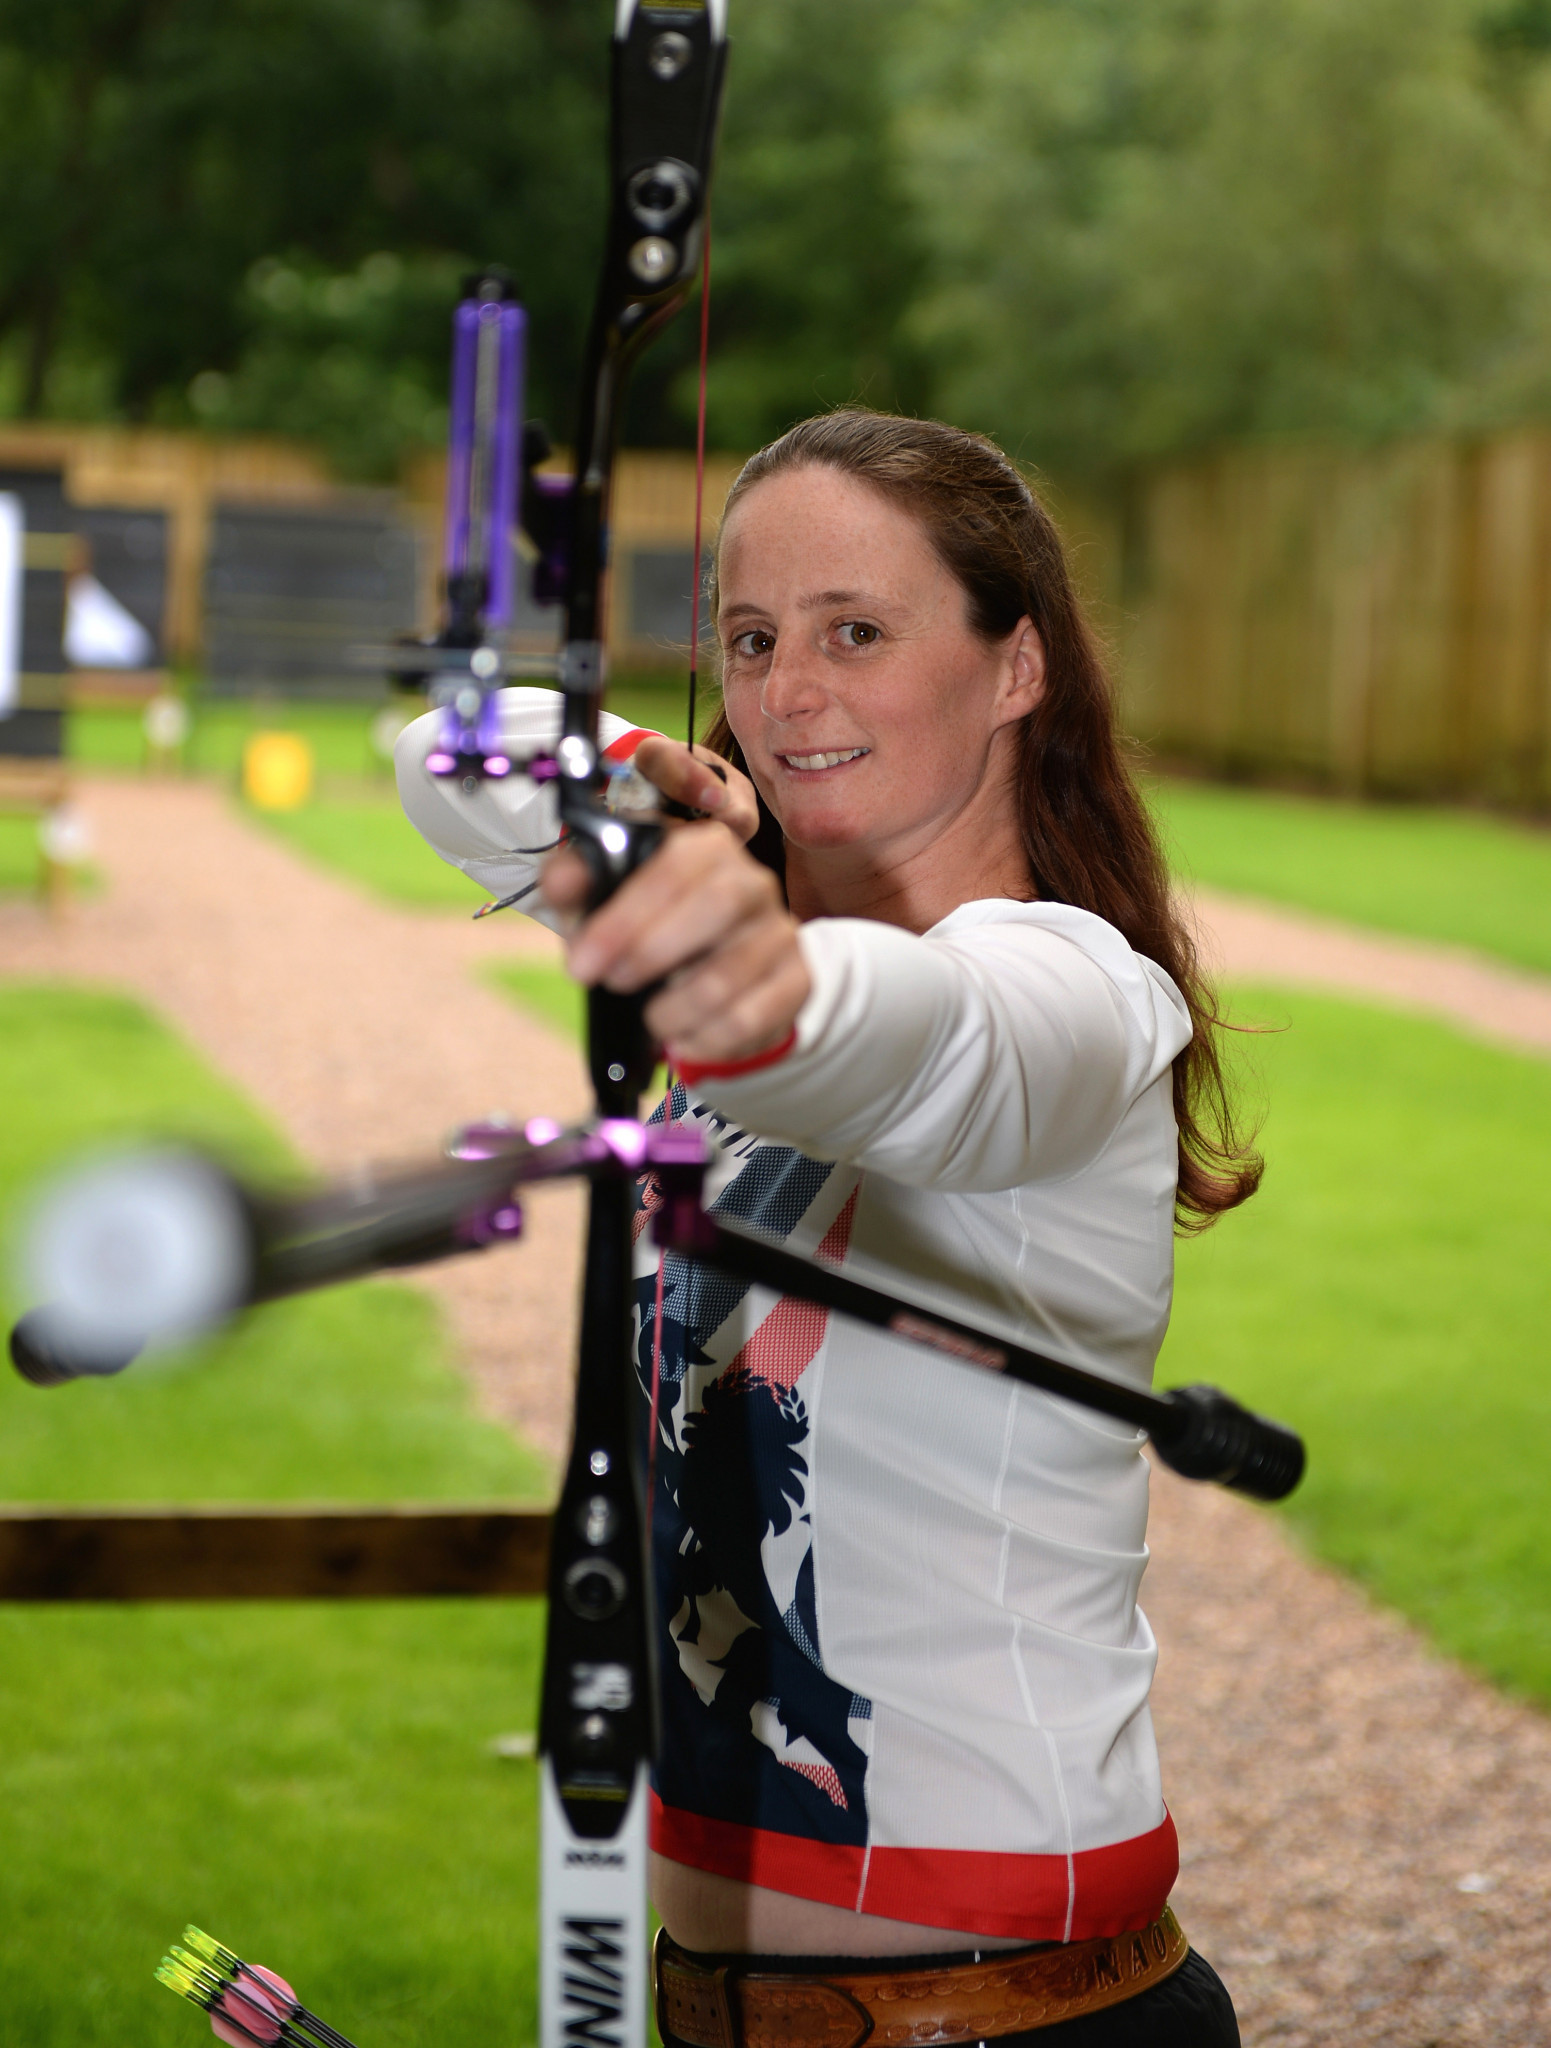 Britain names archery teams for Tokyo 2020 Olympics and Paralympics